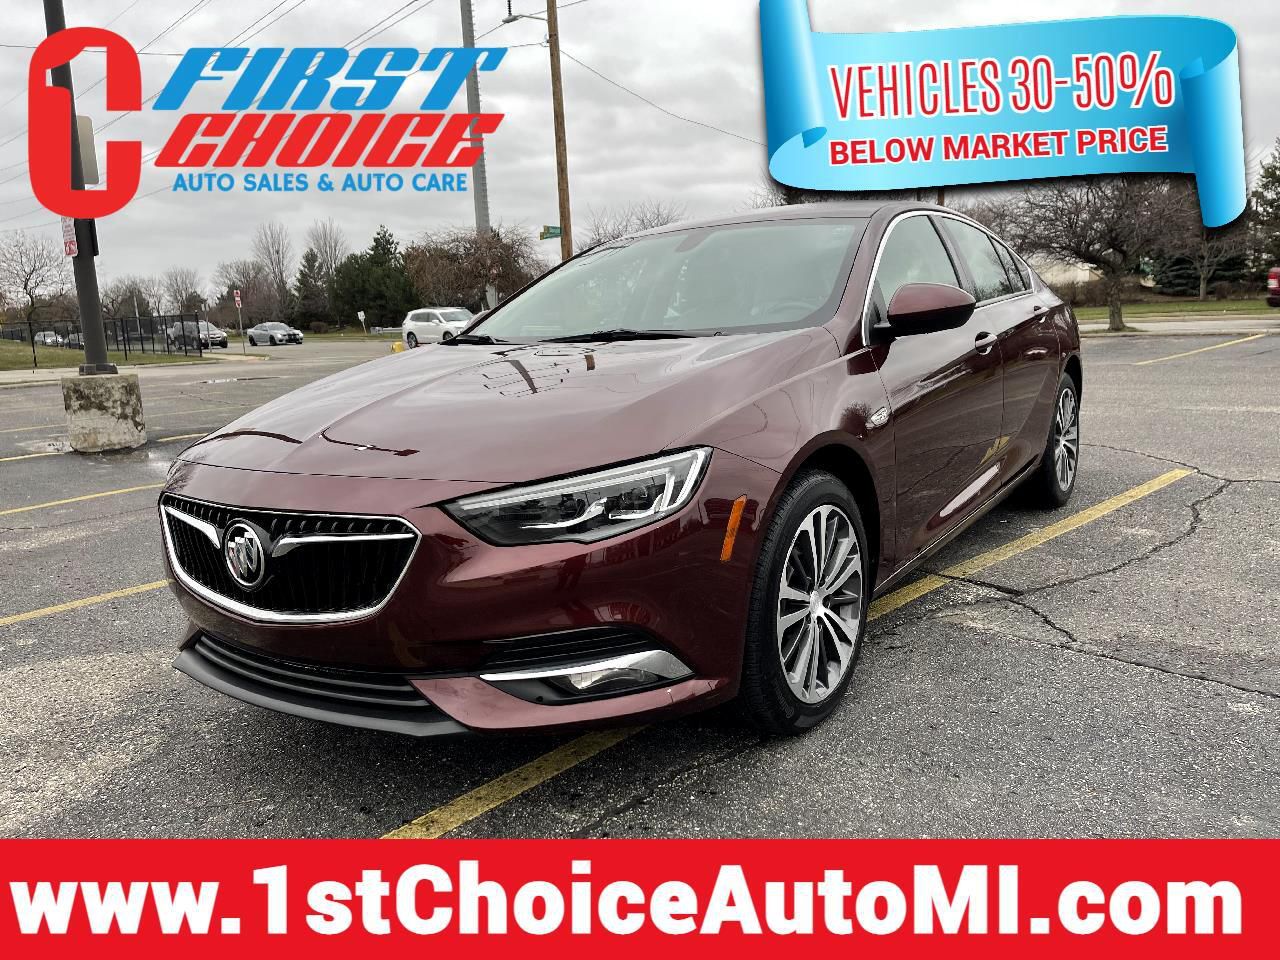 2018 Buick Regal for Sale in Lincoln Park, MI - OfferUp